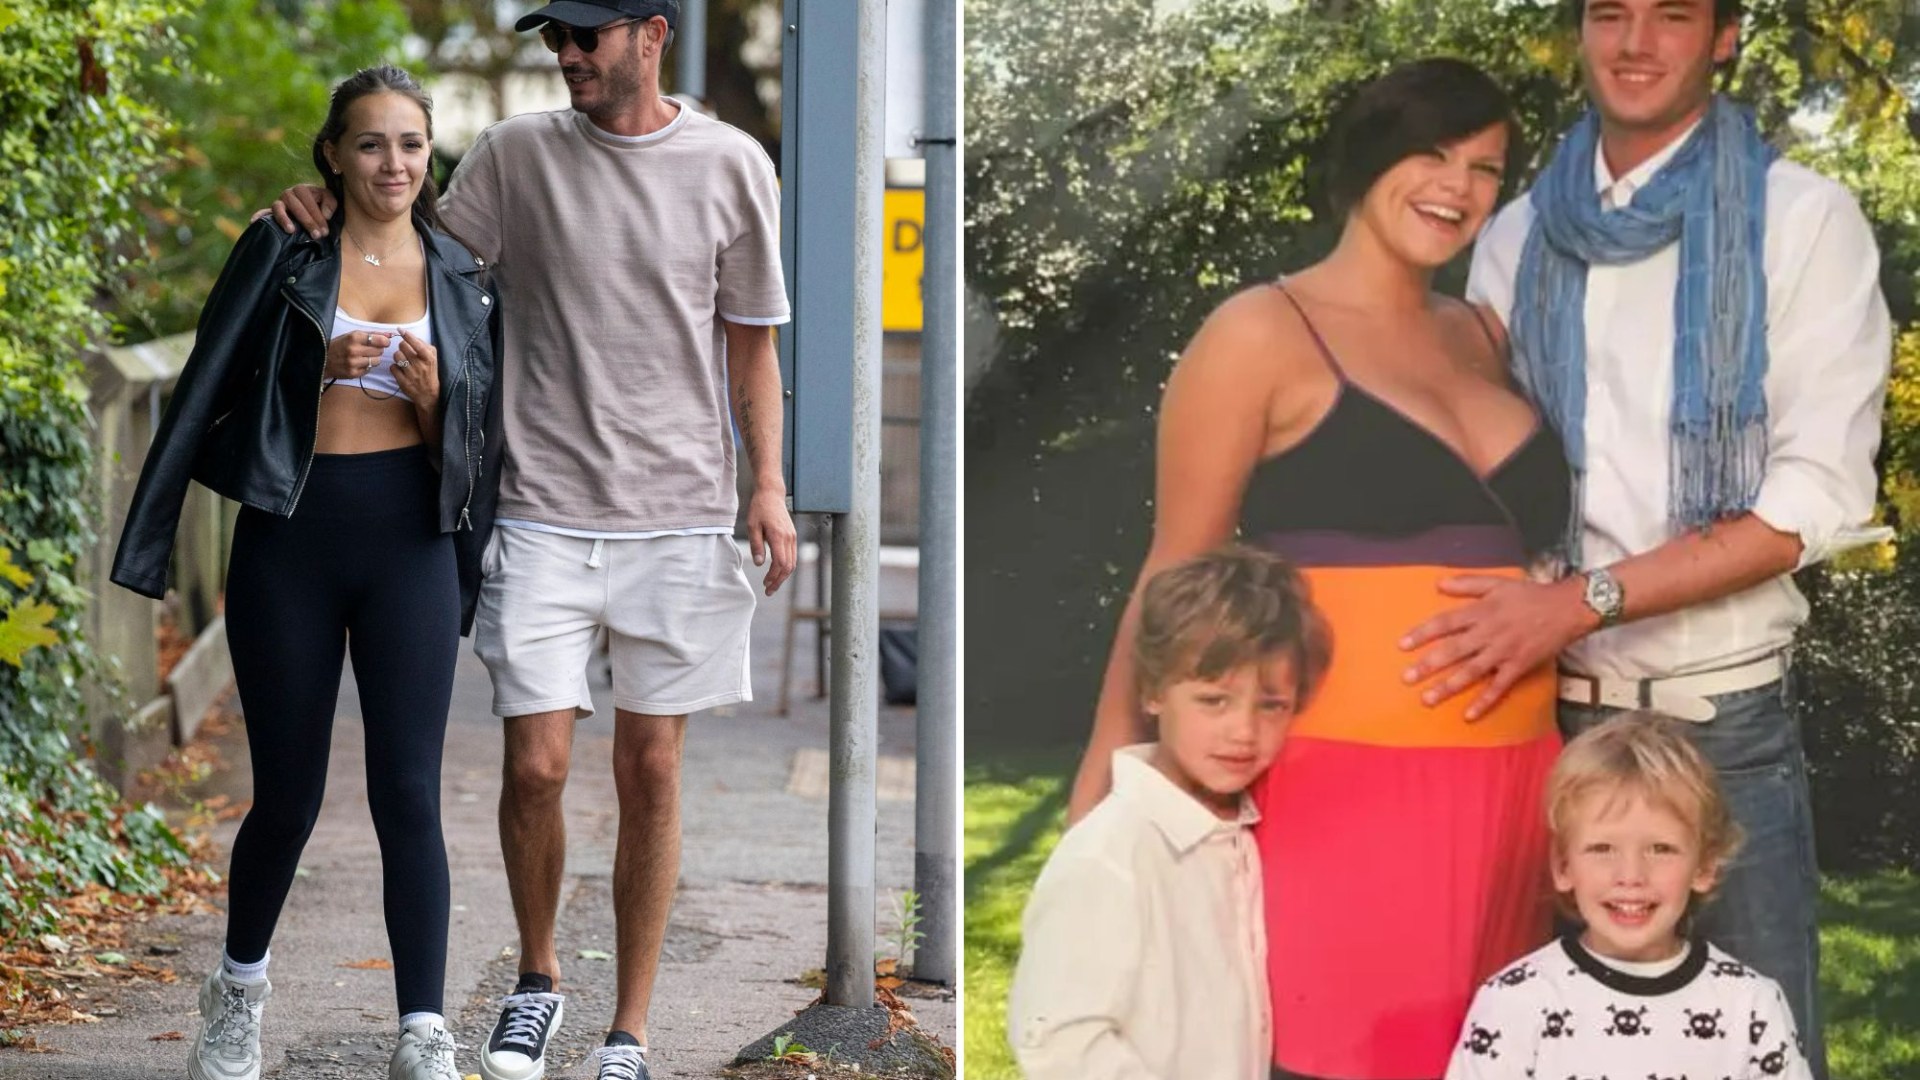 Jack Tweed reveals girlfriend is pregnant with 1st baby as he finally finds happiness 15 years after Jade Goody’s death [Video]